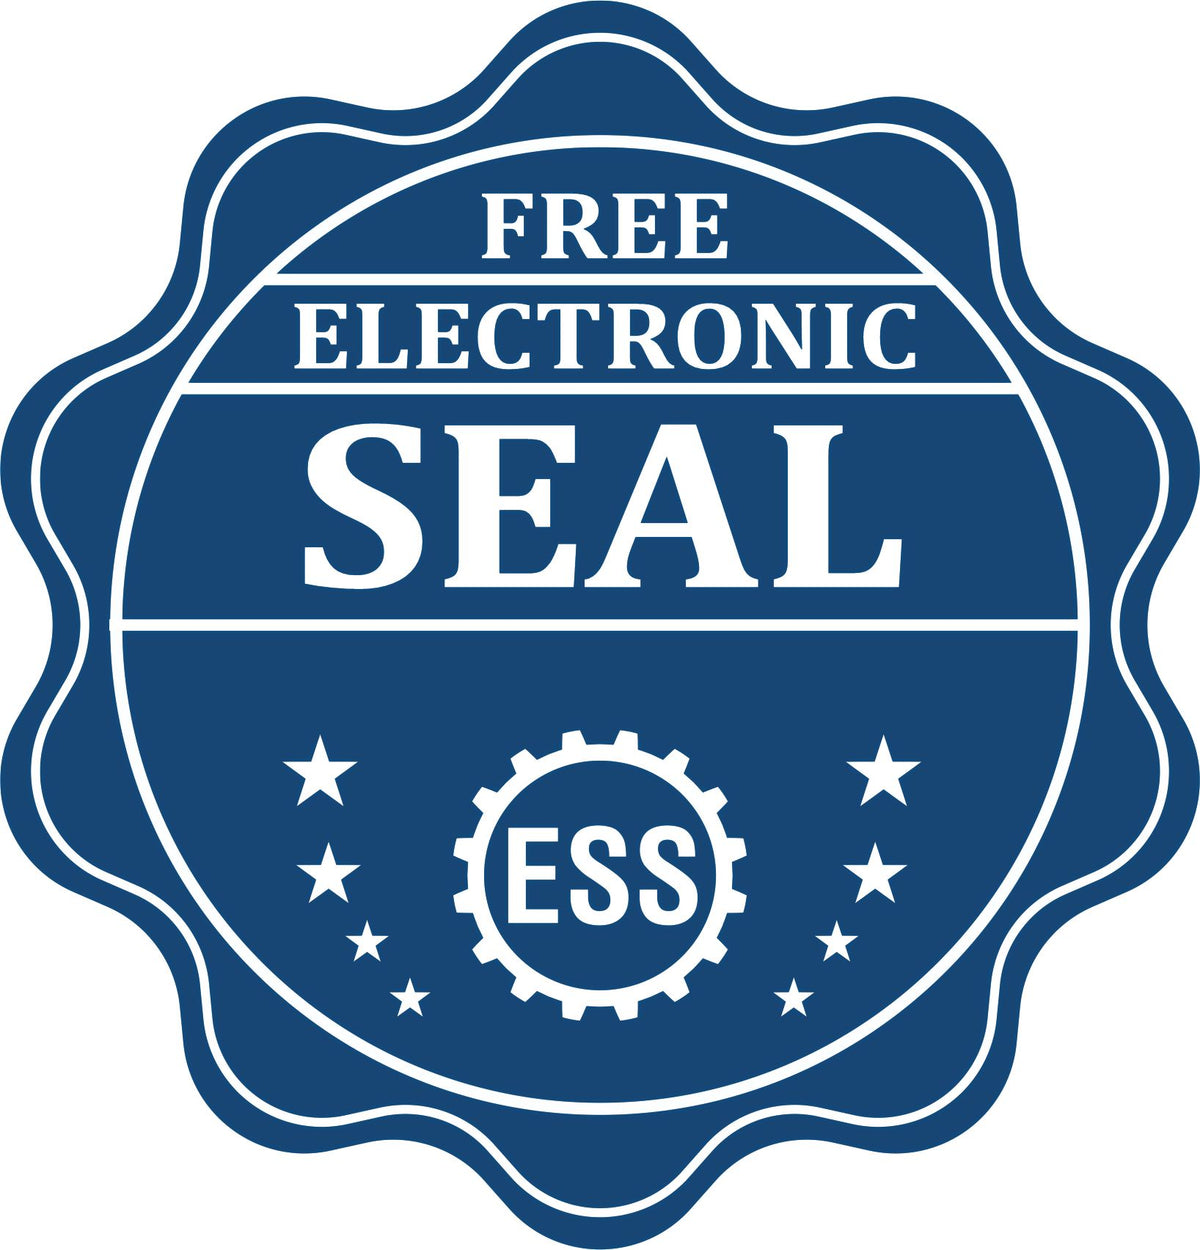 A badge showing a free electronic seal for the Handheld New Mexico Professional Engineer Embosser with stars and the ESS gear on the emblem.